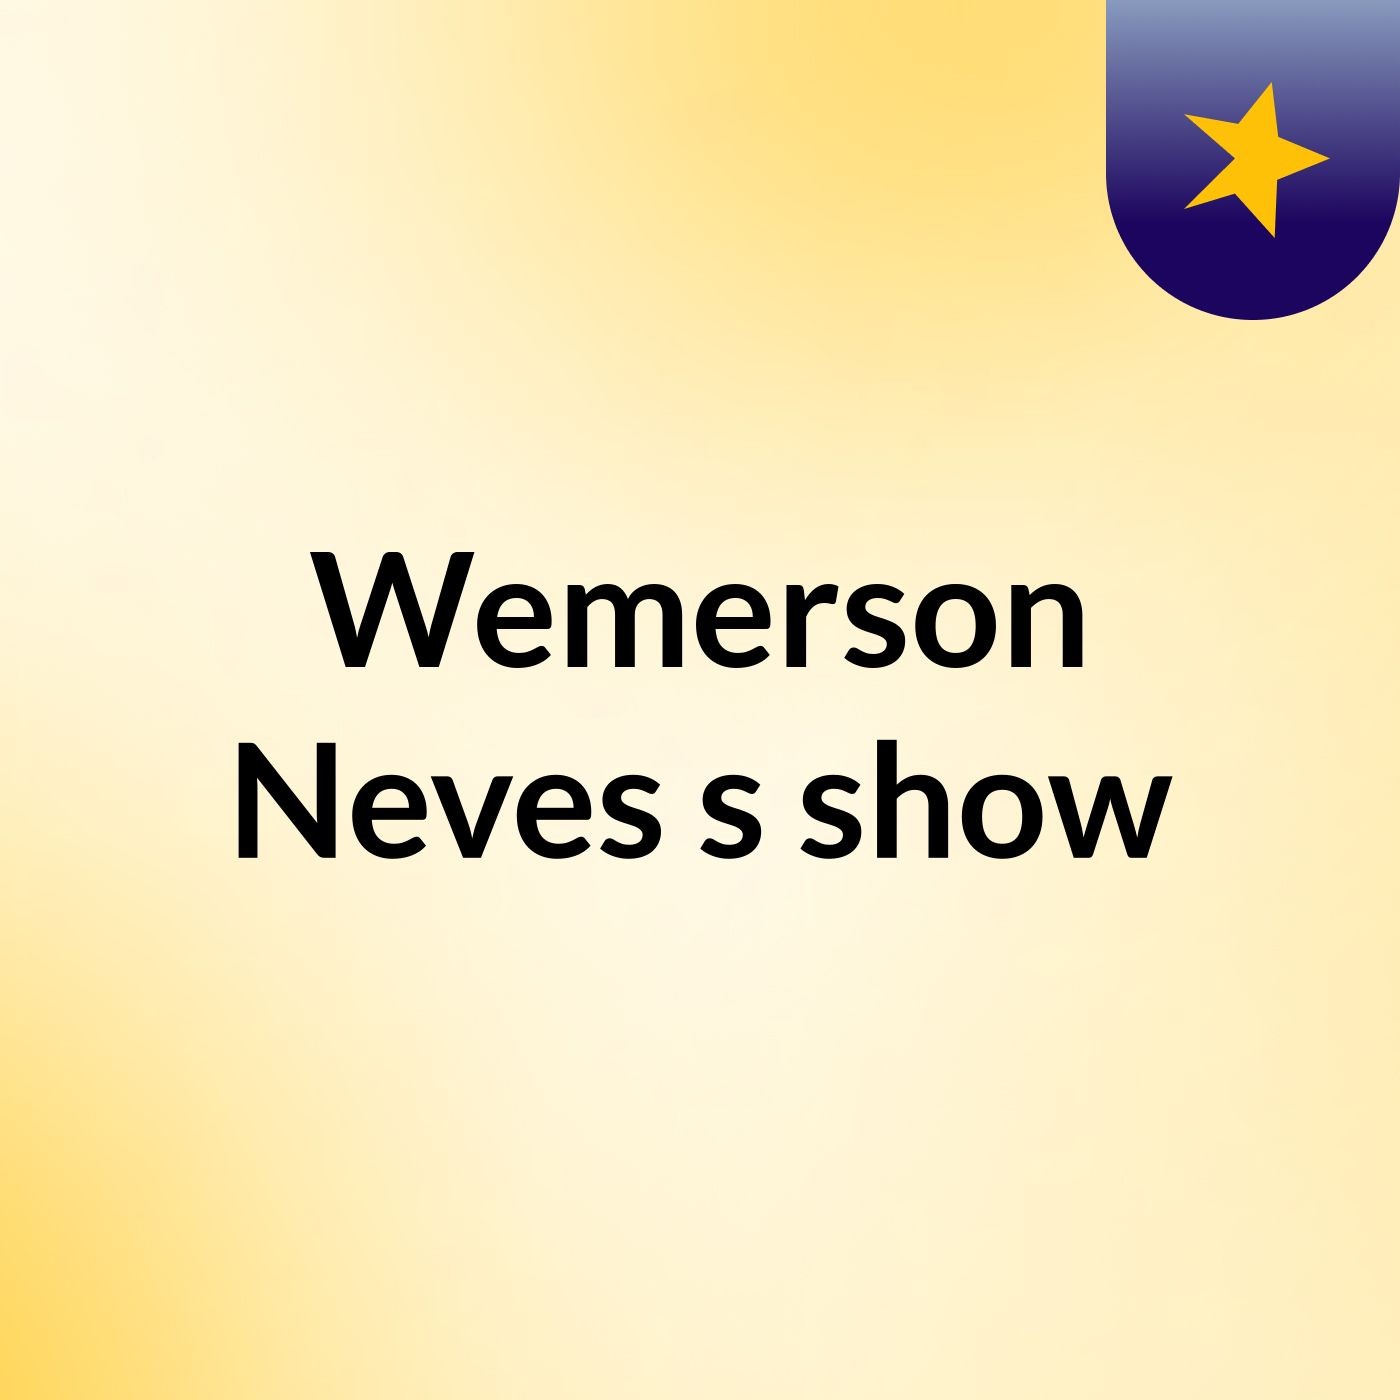 Wemerson Neves's show